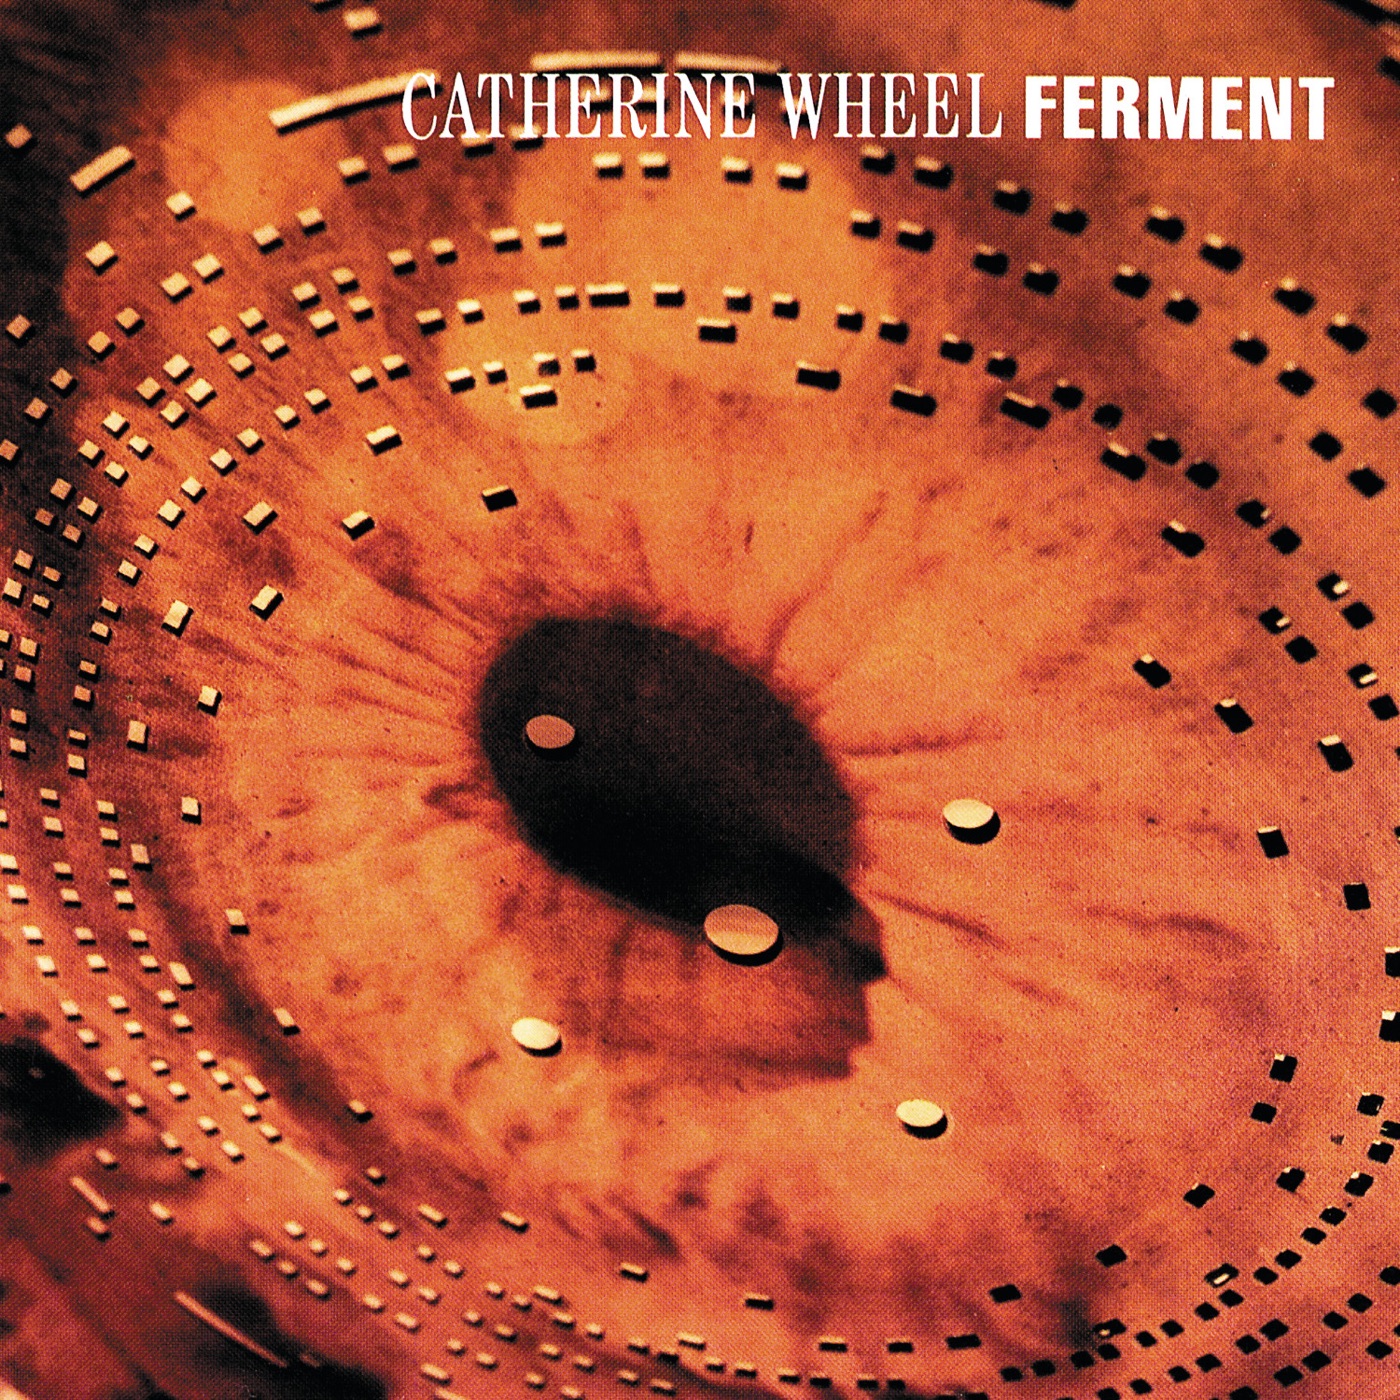 Ferment by Catherine Wheel